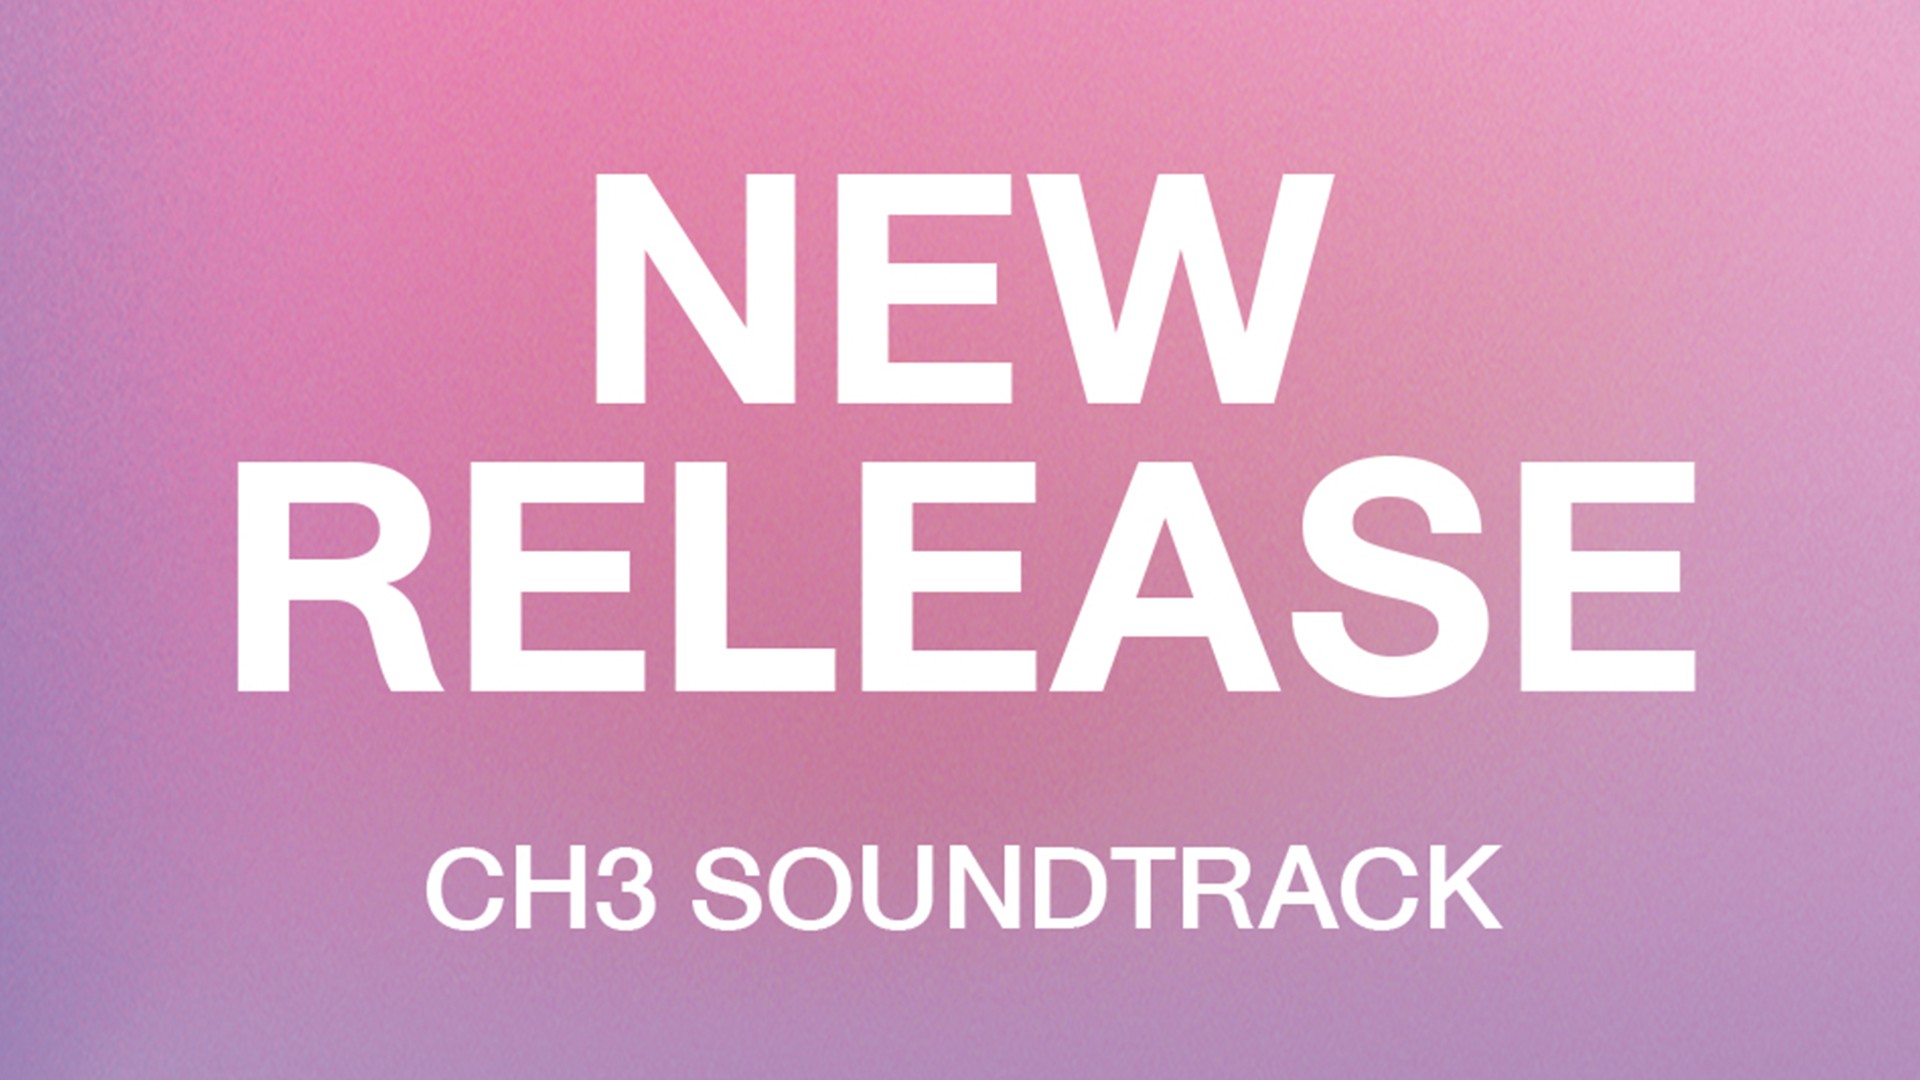 New Release CH3 Soundtrack